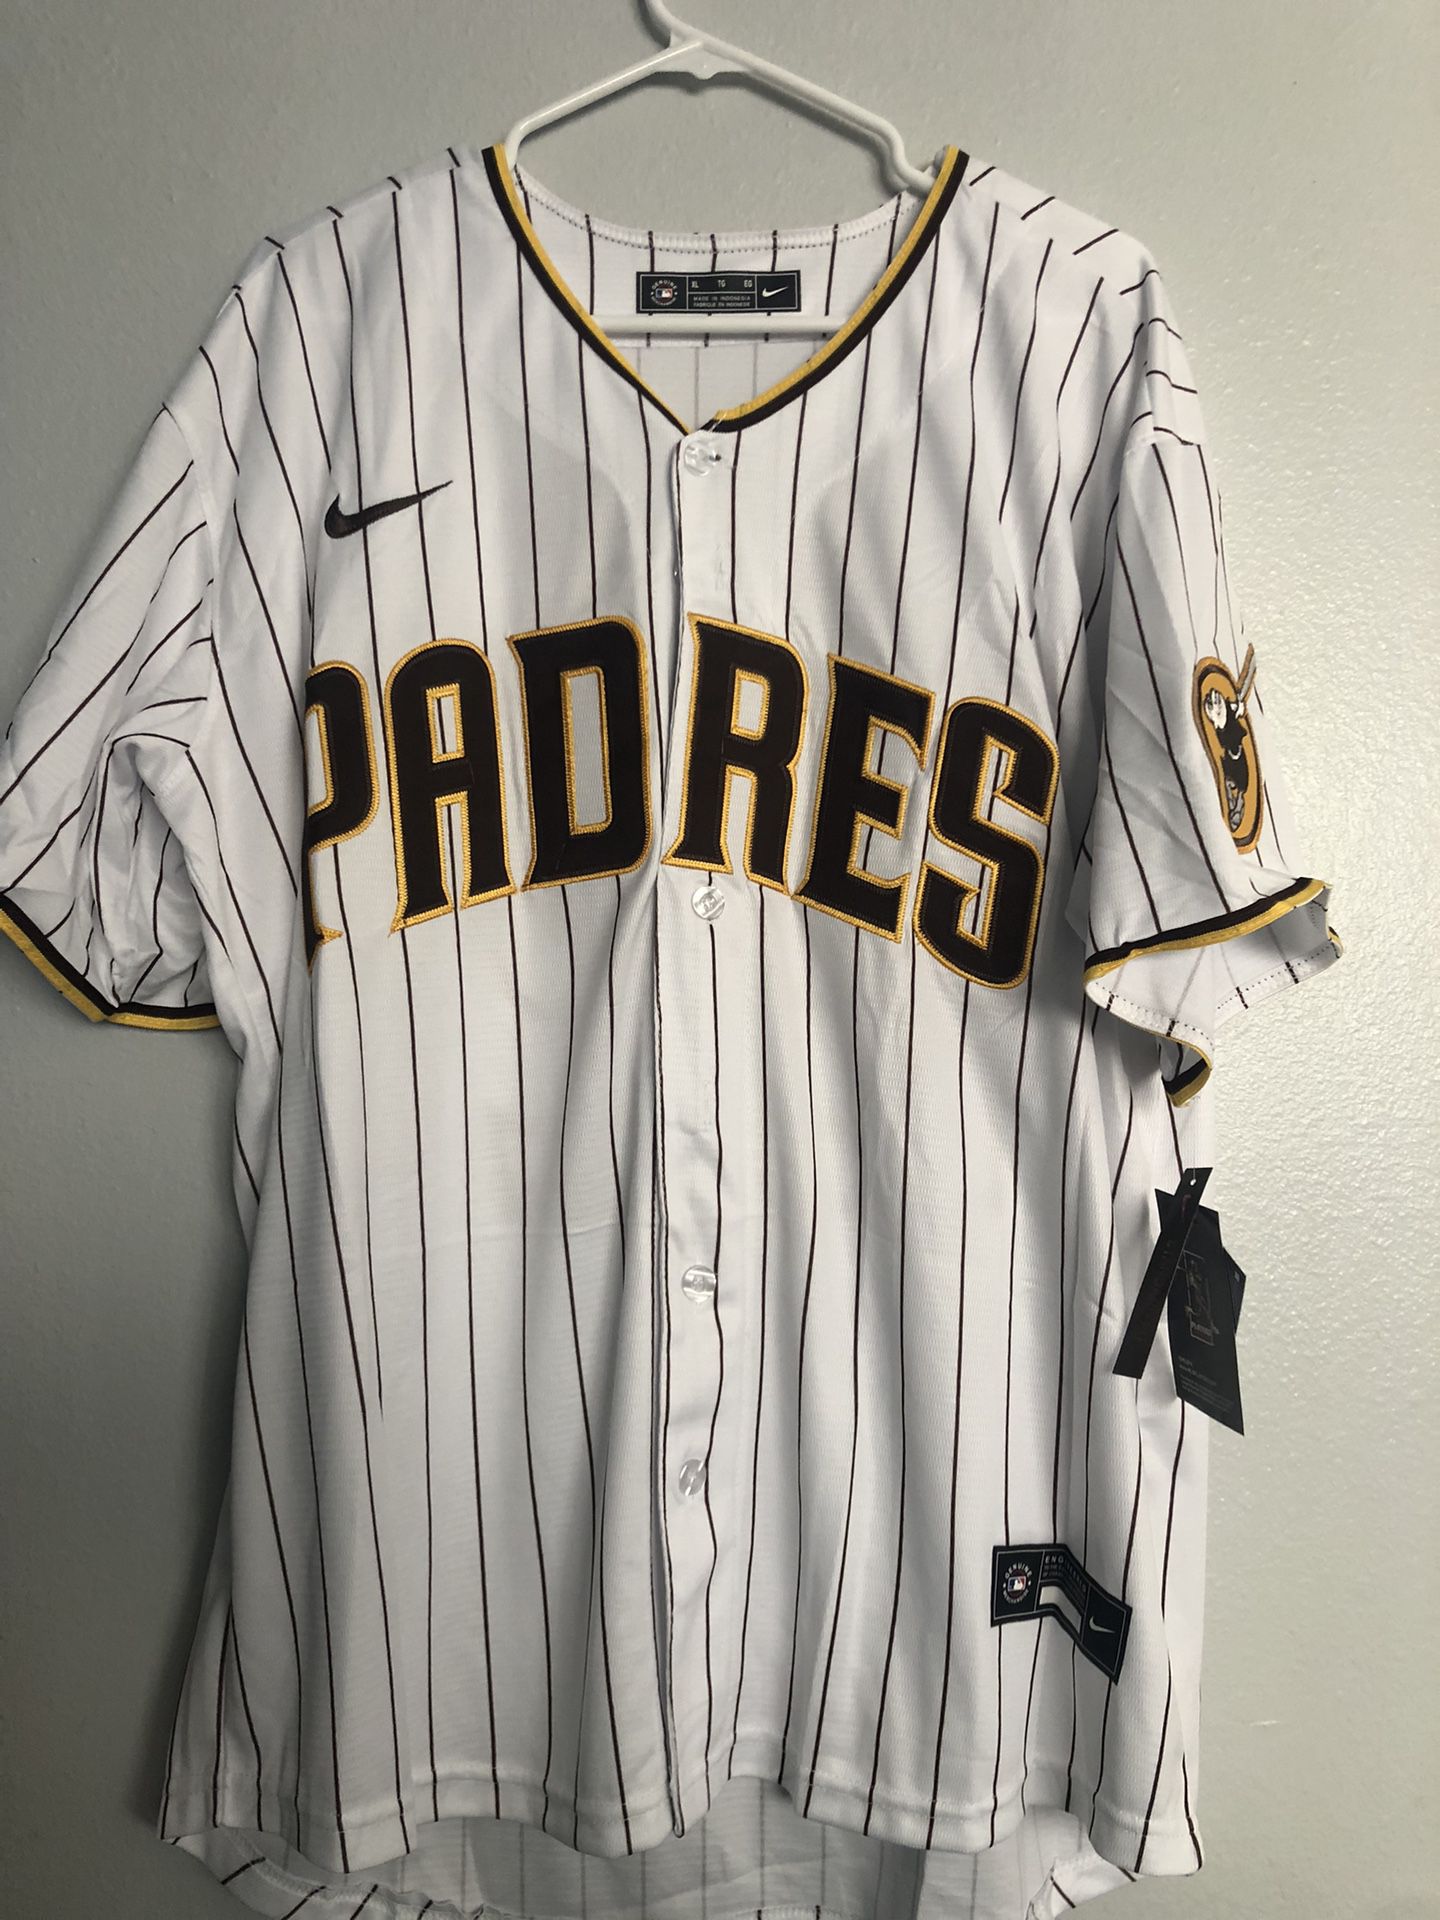 Men's Nike MLB Authentic Fernando Tatis Jr San Diego Padres Camo Jersey  Size L for Sale in Chula Vista, CA - OfferUp